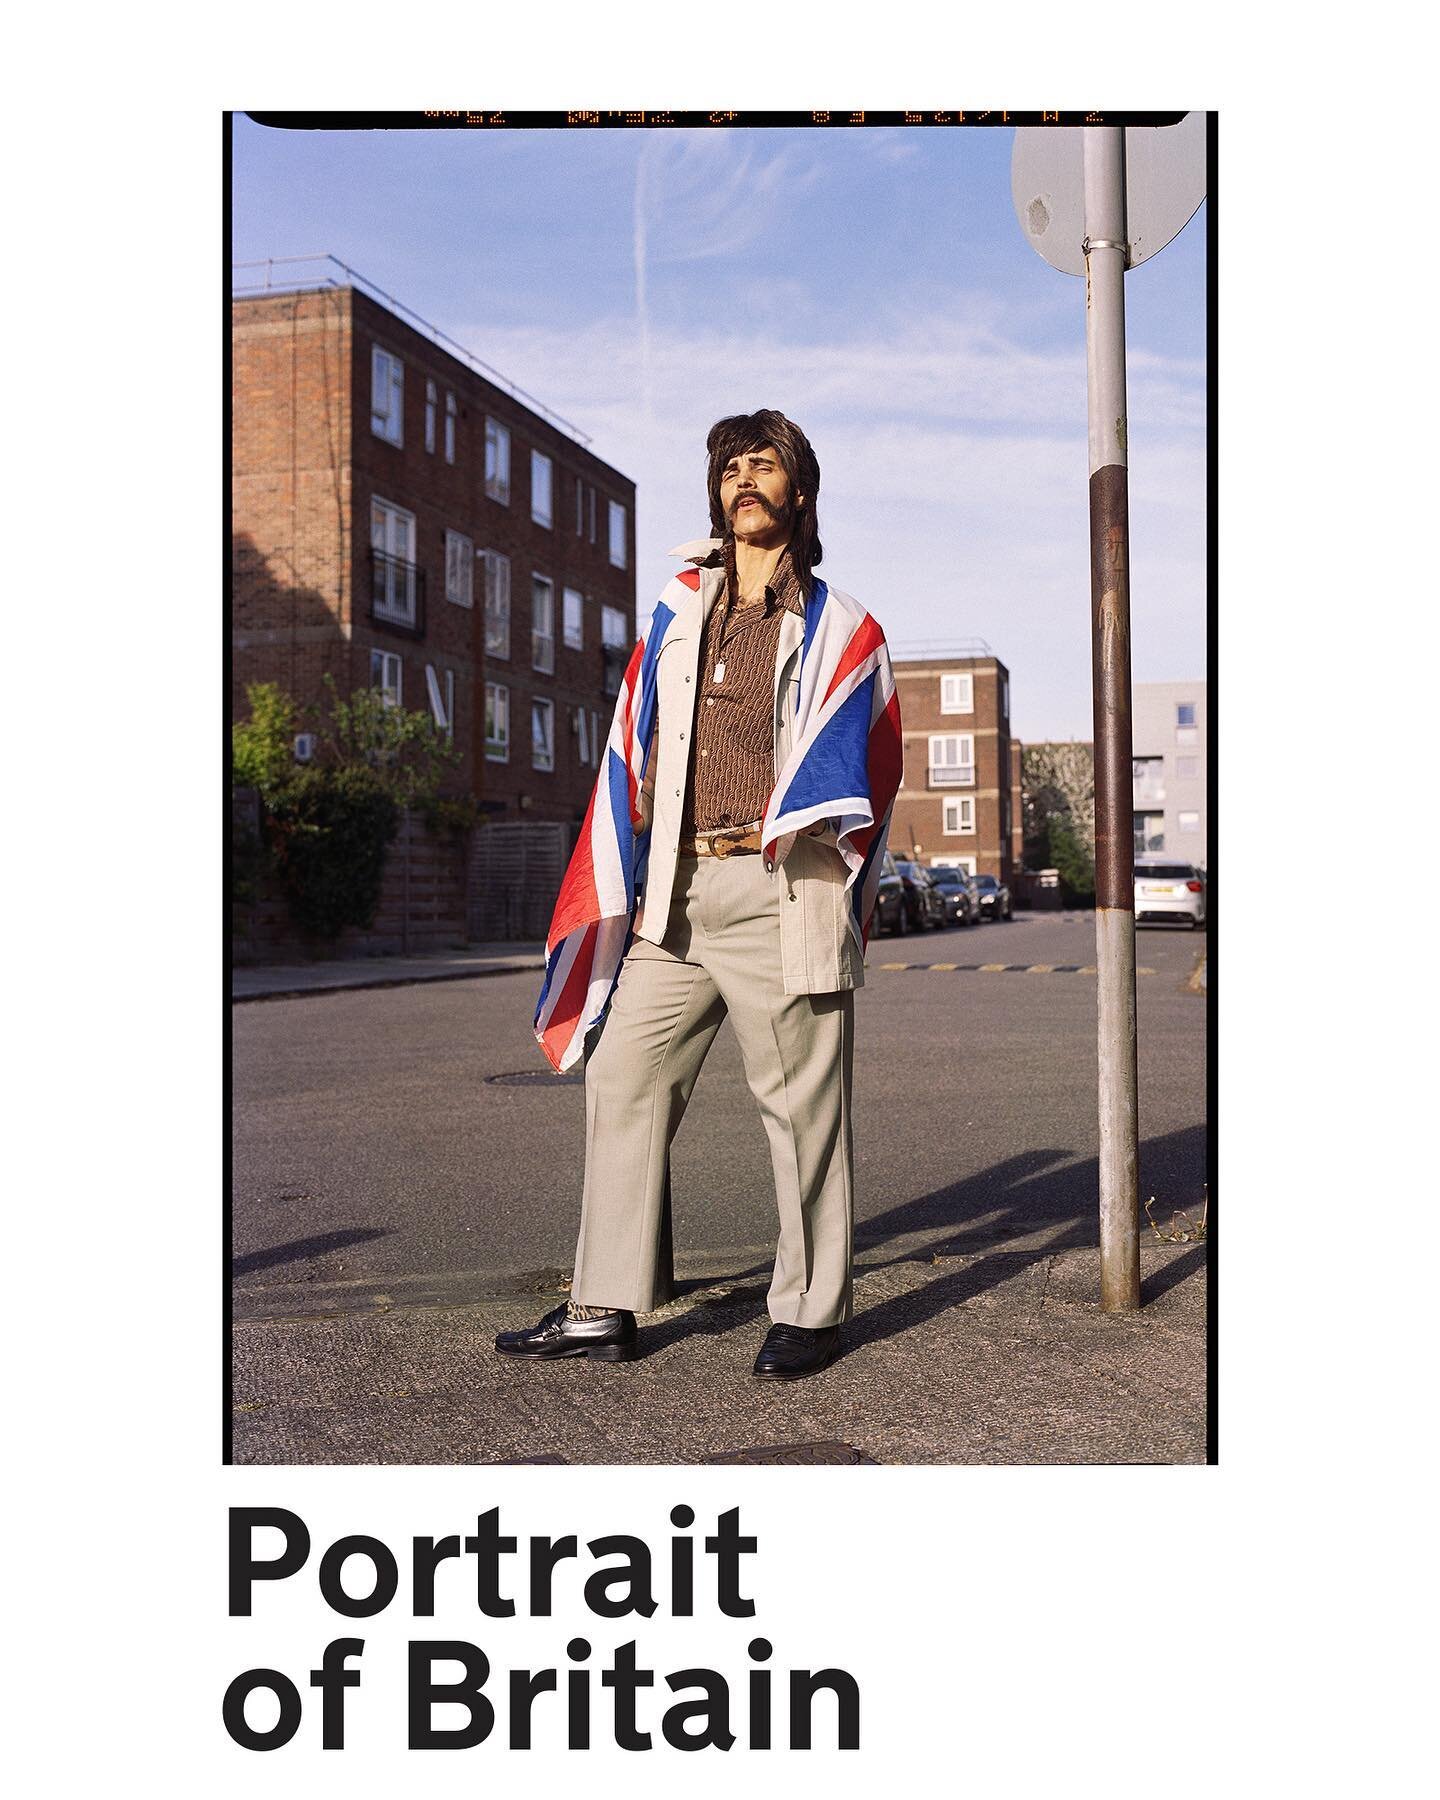 So happy this photo of @mr_pat_riarchy has been placed in this year&rsquo;s shortlist for Portrait of Britain - only the charismatic Pat Riarchy would have got me into flag waving. The photo will be in Portrait of Britain Vol 6 photobook with @blueco